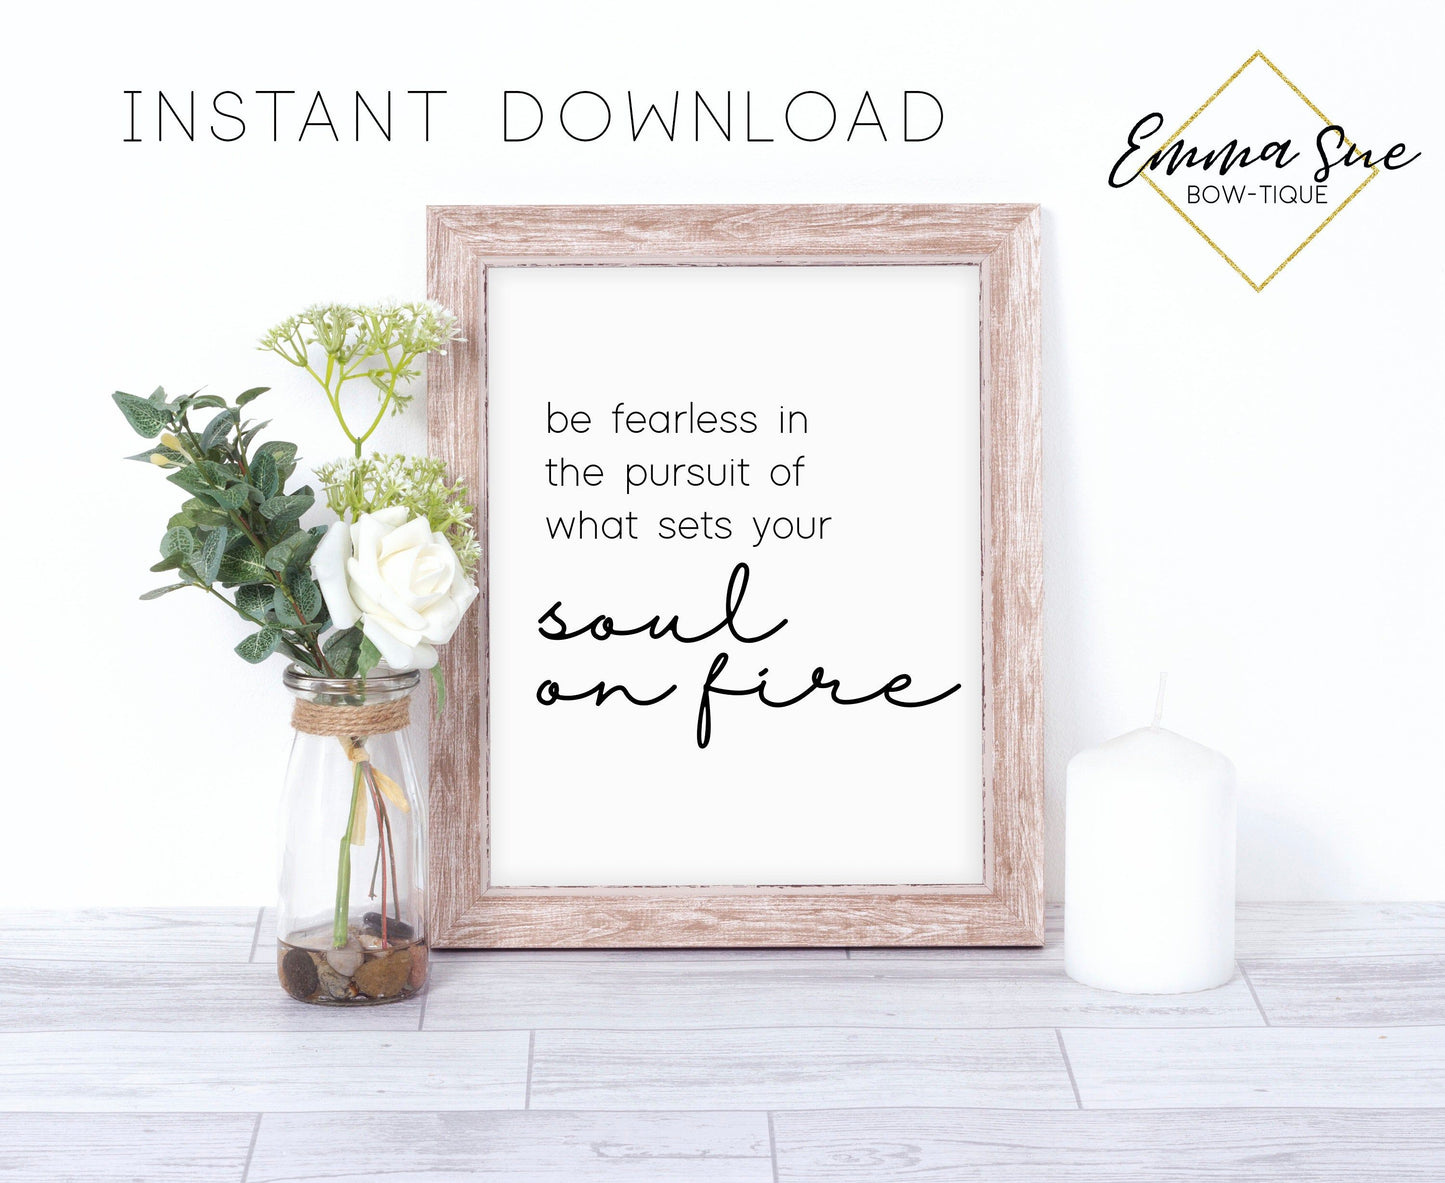 Be fearless in the pursuit of what sets your soul on fire - Motivational Quote Printable Sign Wall Art Digital File